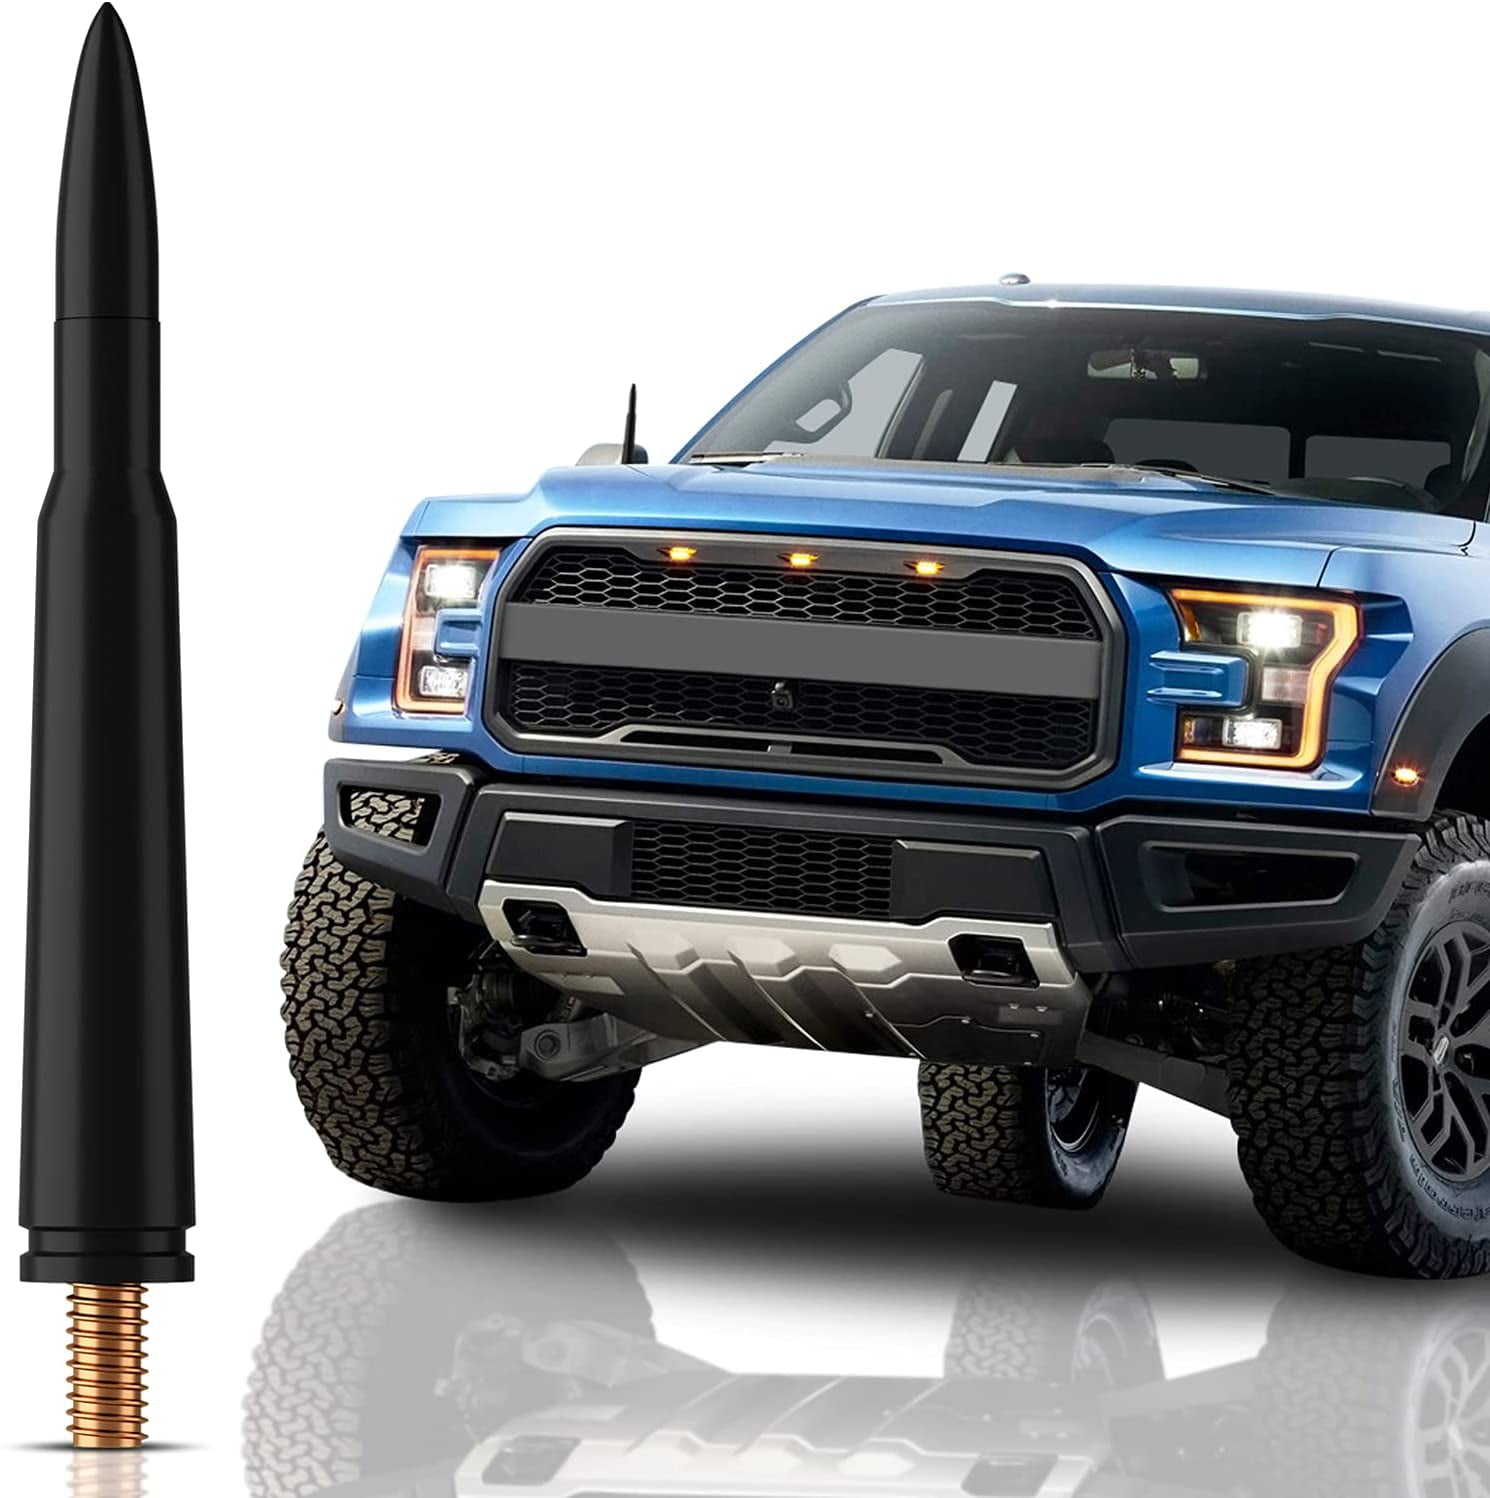 Designed for Optimized FM/AM Reception 7 Inches Car Wash-Proof Short Antenna Replacement for Ford F150 Raptor 2009-2020 